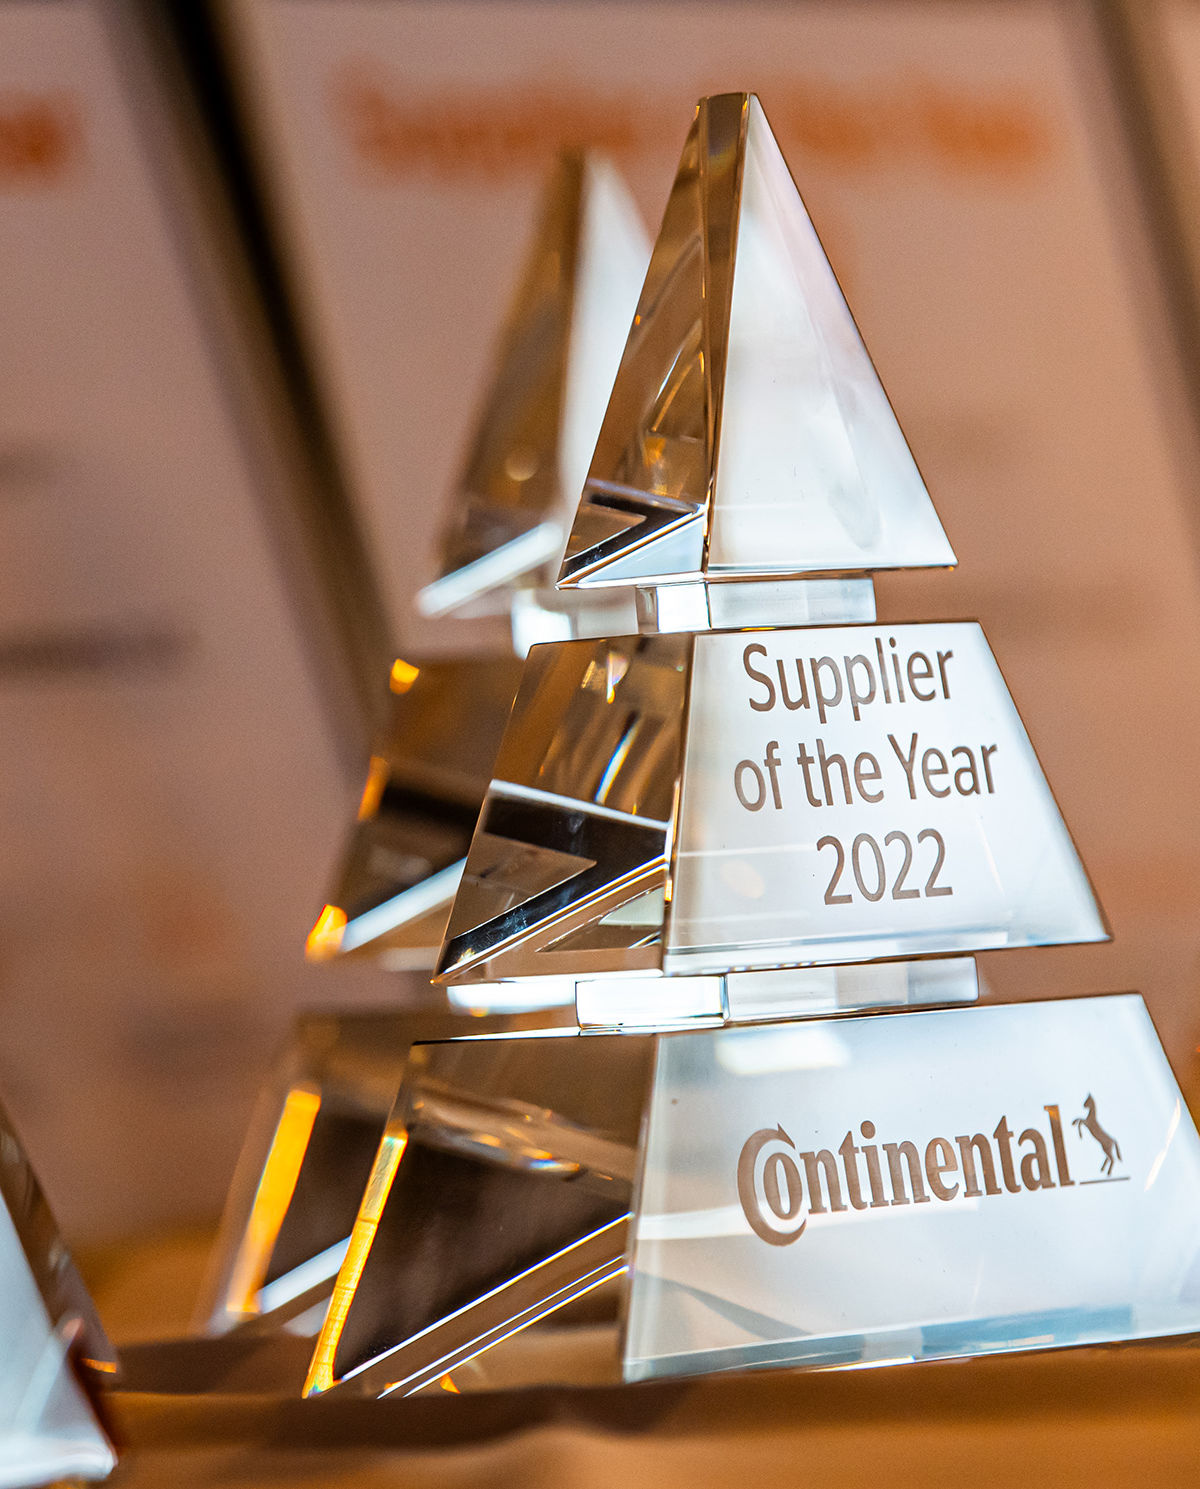 Continental Automotive Suppliers Awards Trophy